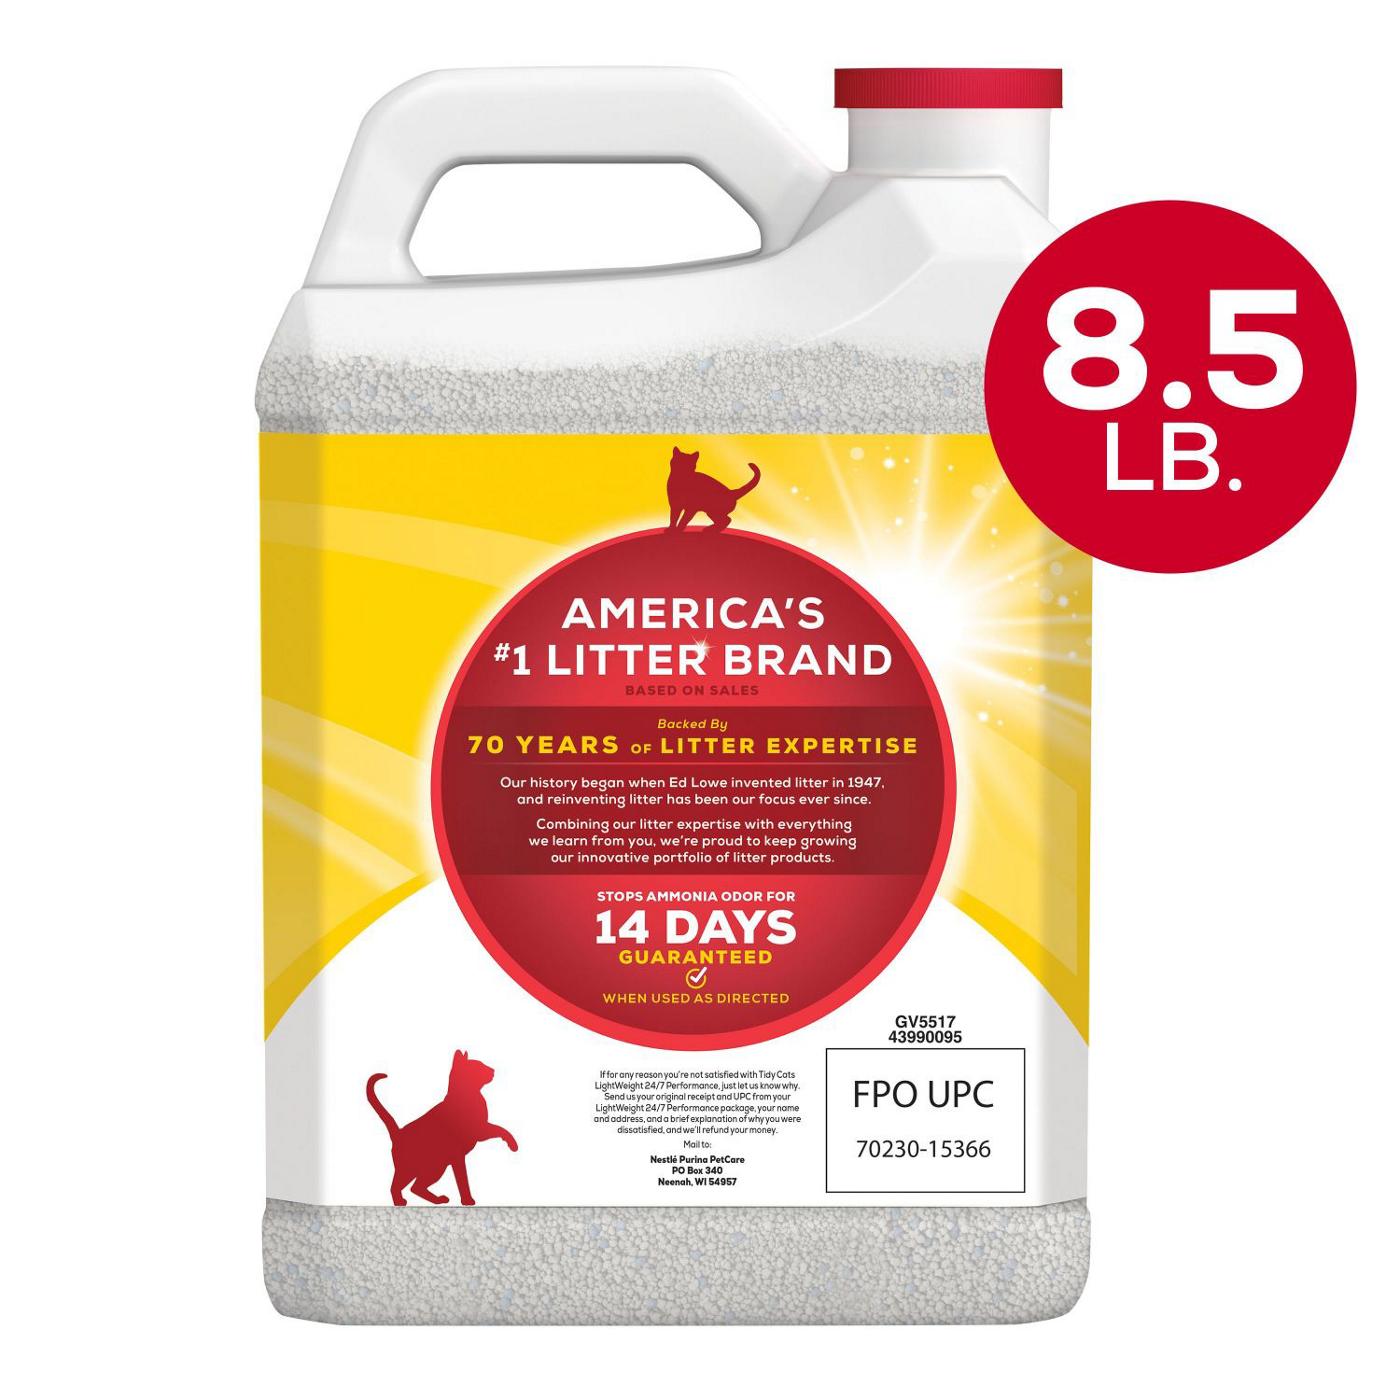 Tidy Cats Purina Tidy Cats Light Weight, Low Dust, Clumping Cat Litter, 24/7 Performance Multi Cat Litter; image 6 of 6